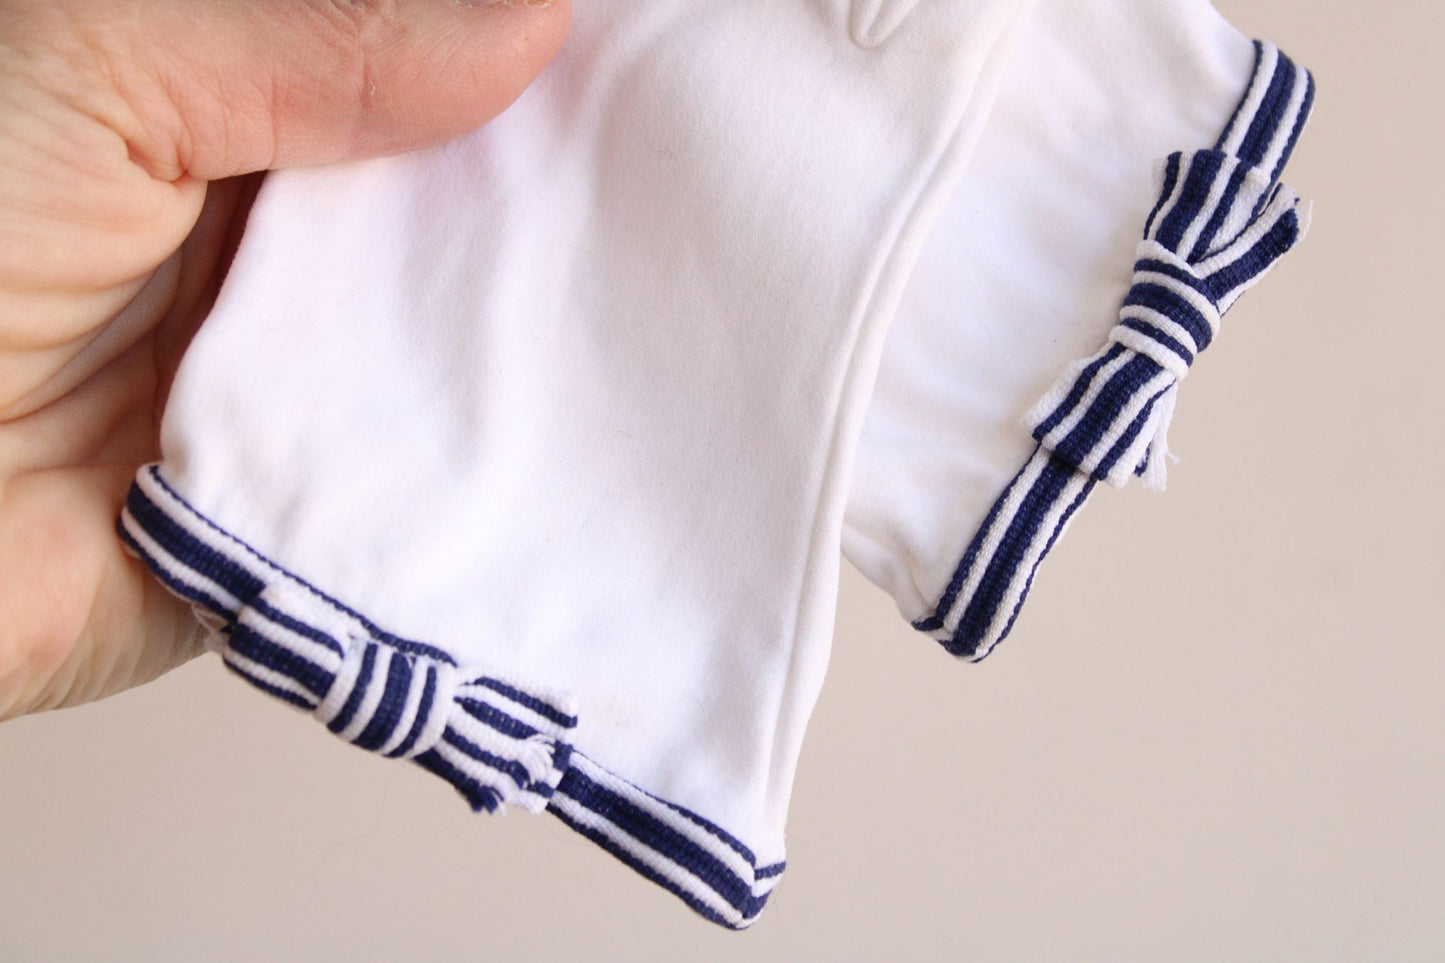 Vintage 1960s Gloves With Bows, Henri Bendel Size 6.5 White Cotton with Navy Blue Stripe